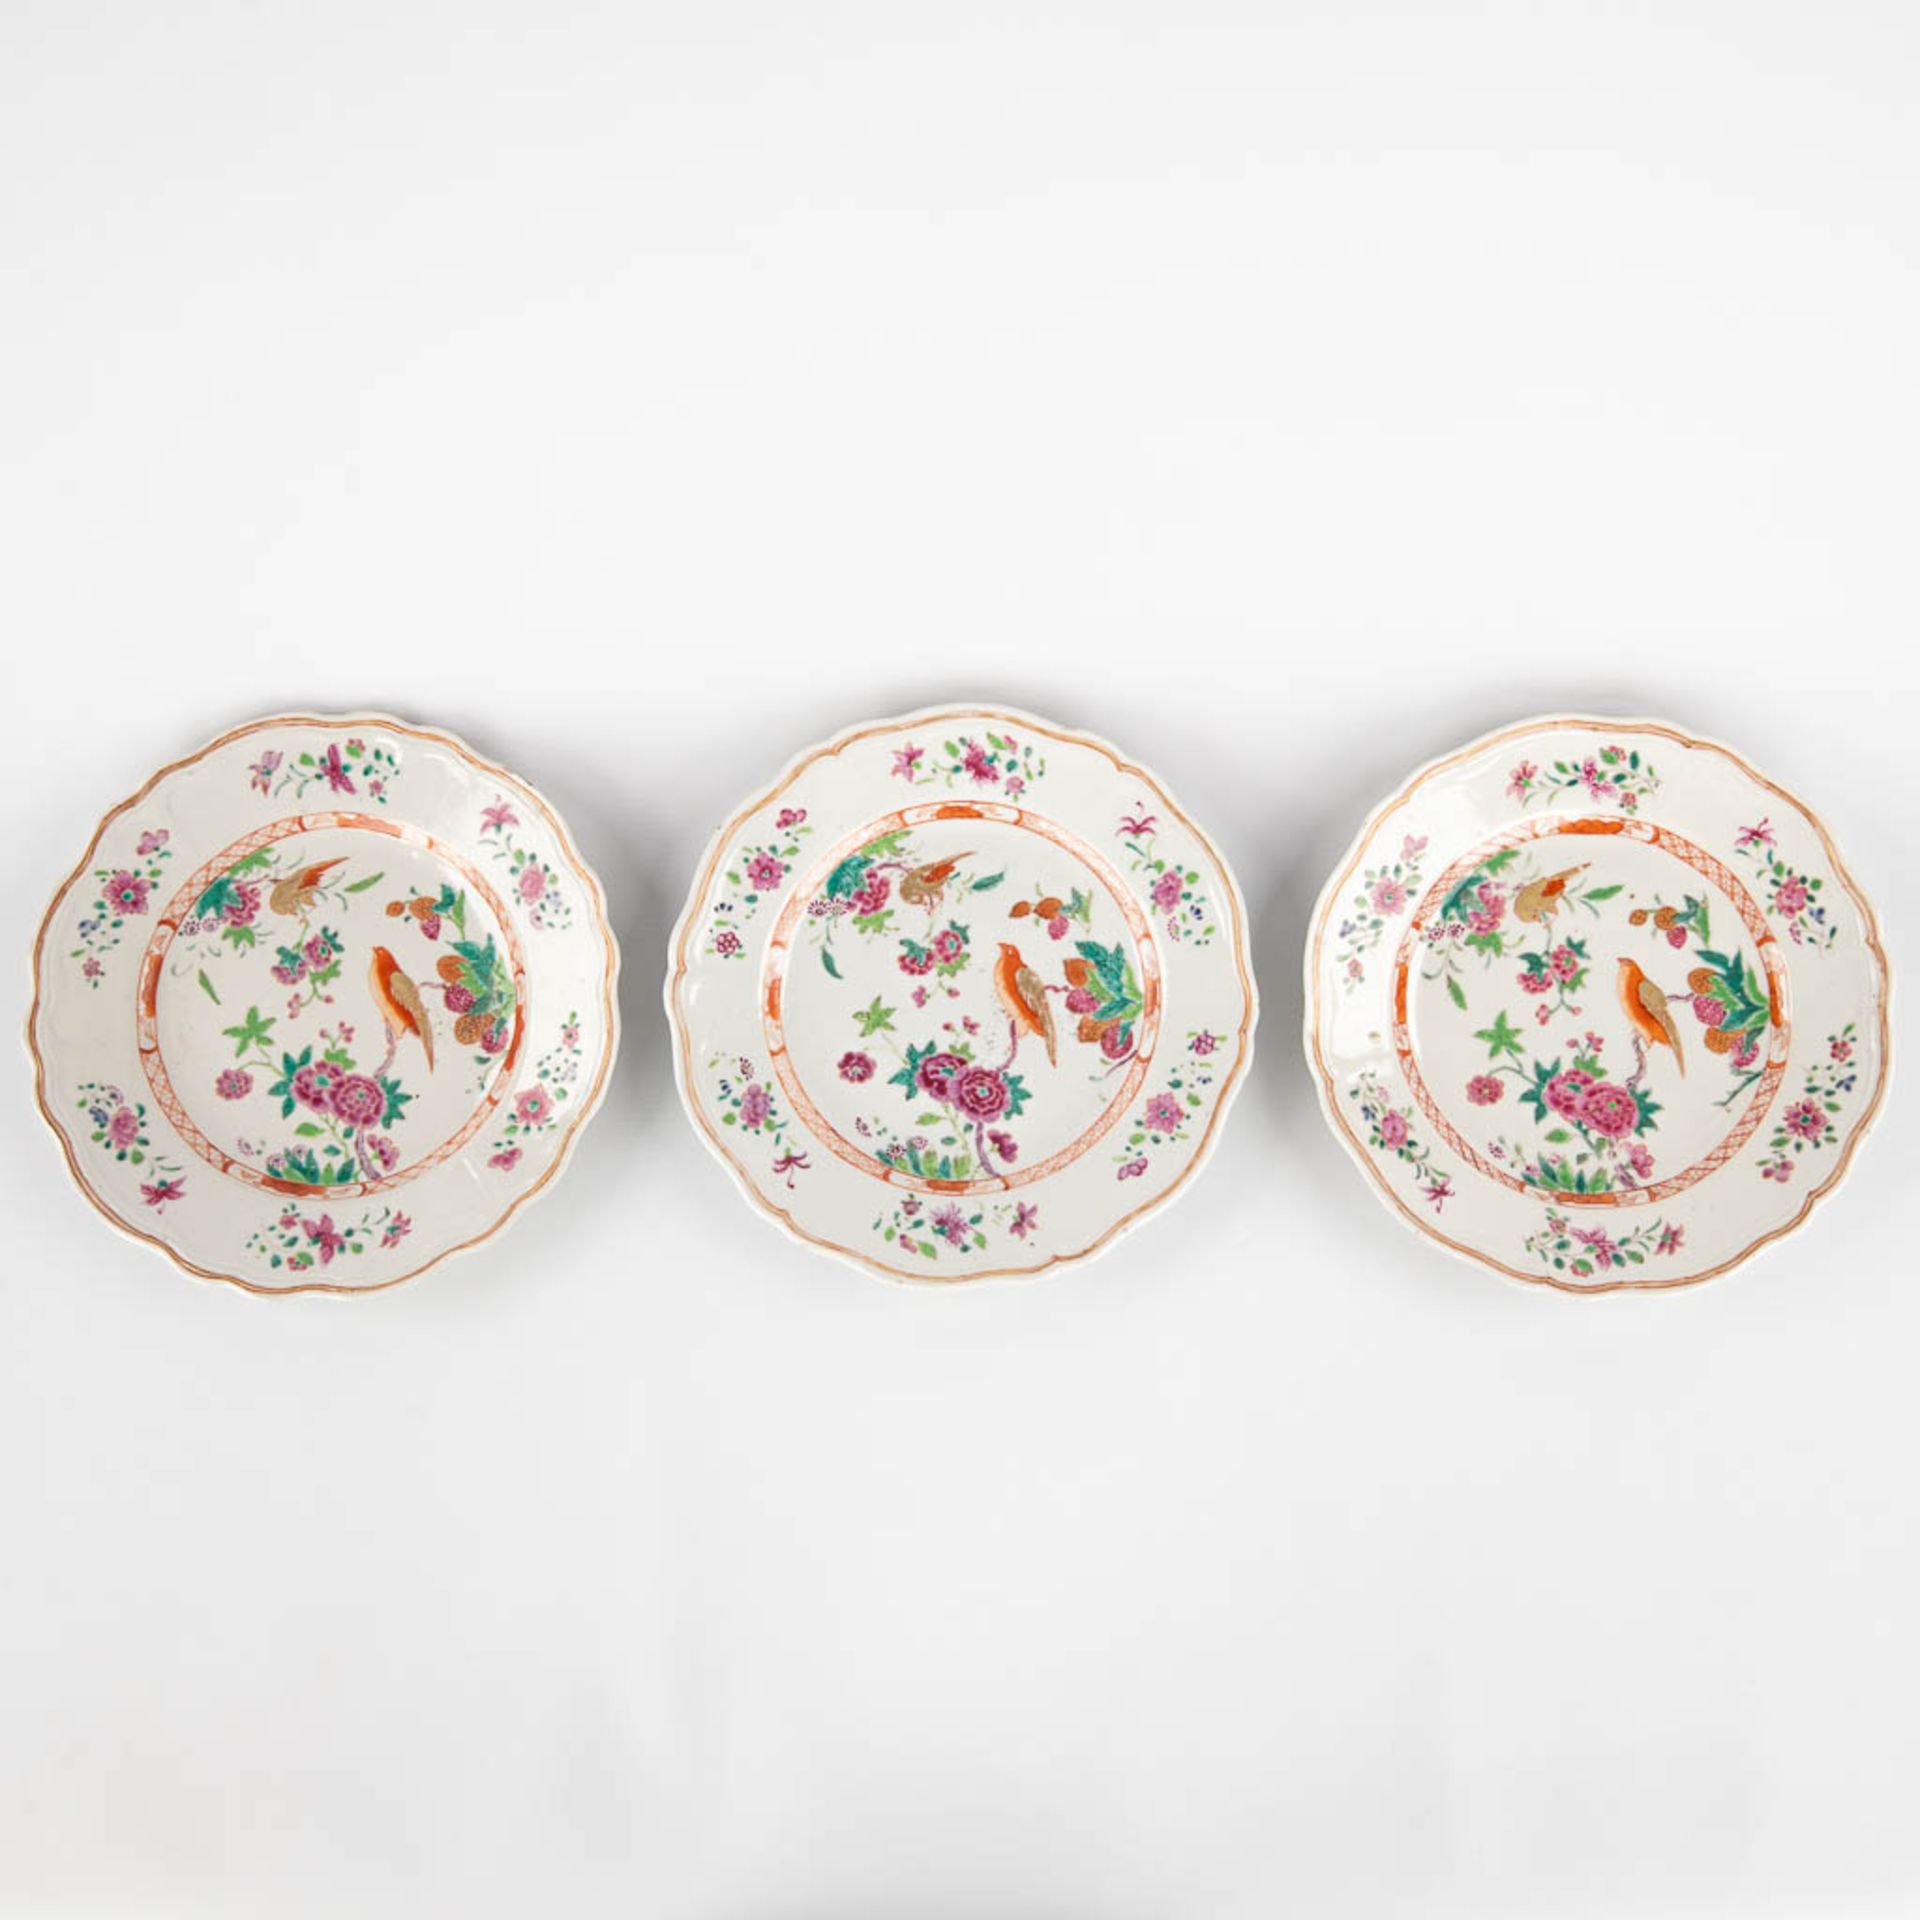 Three Chinese Famille Rose plates, decorated with fauna and flora. 19th/20th C. (D:23,5 cm)